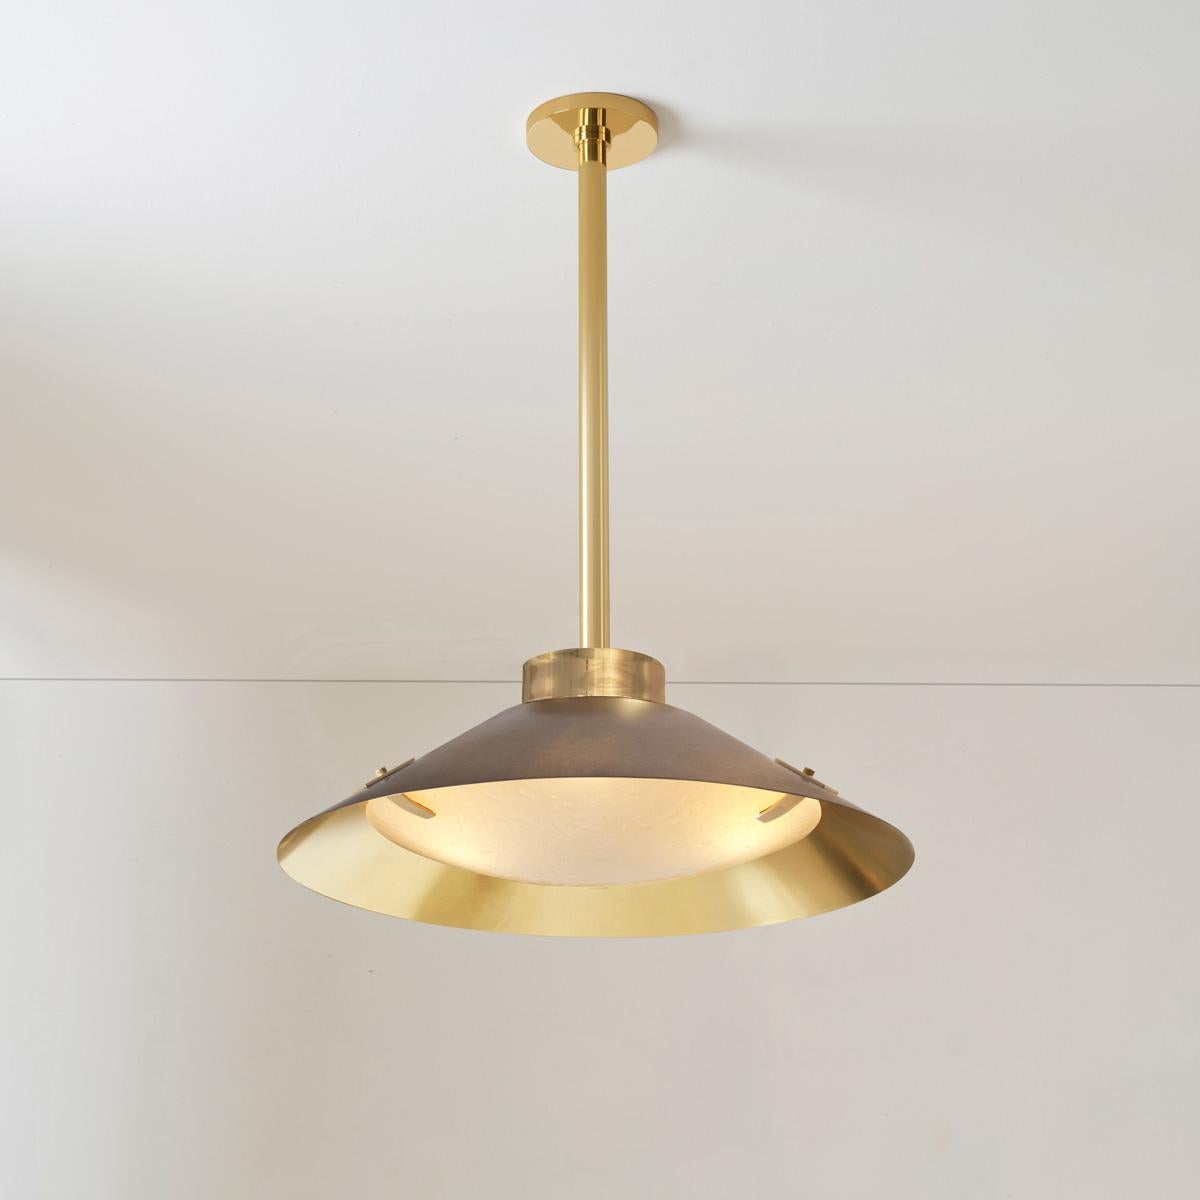 Kono Pendant by Gaspare Asaro. Satin Brass and Sand White For Sale 6